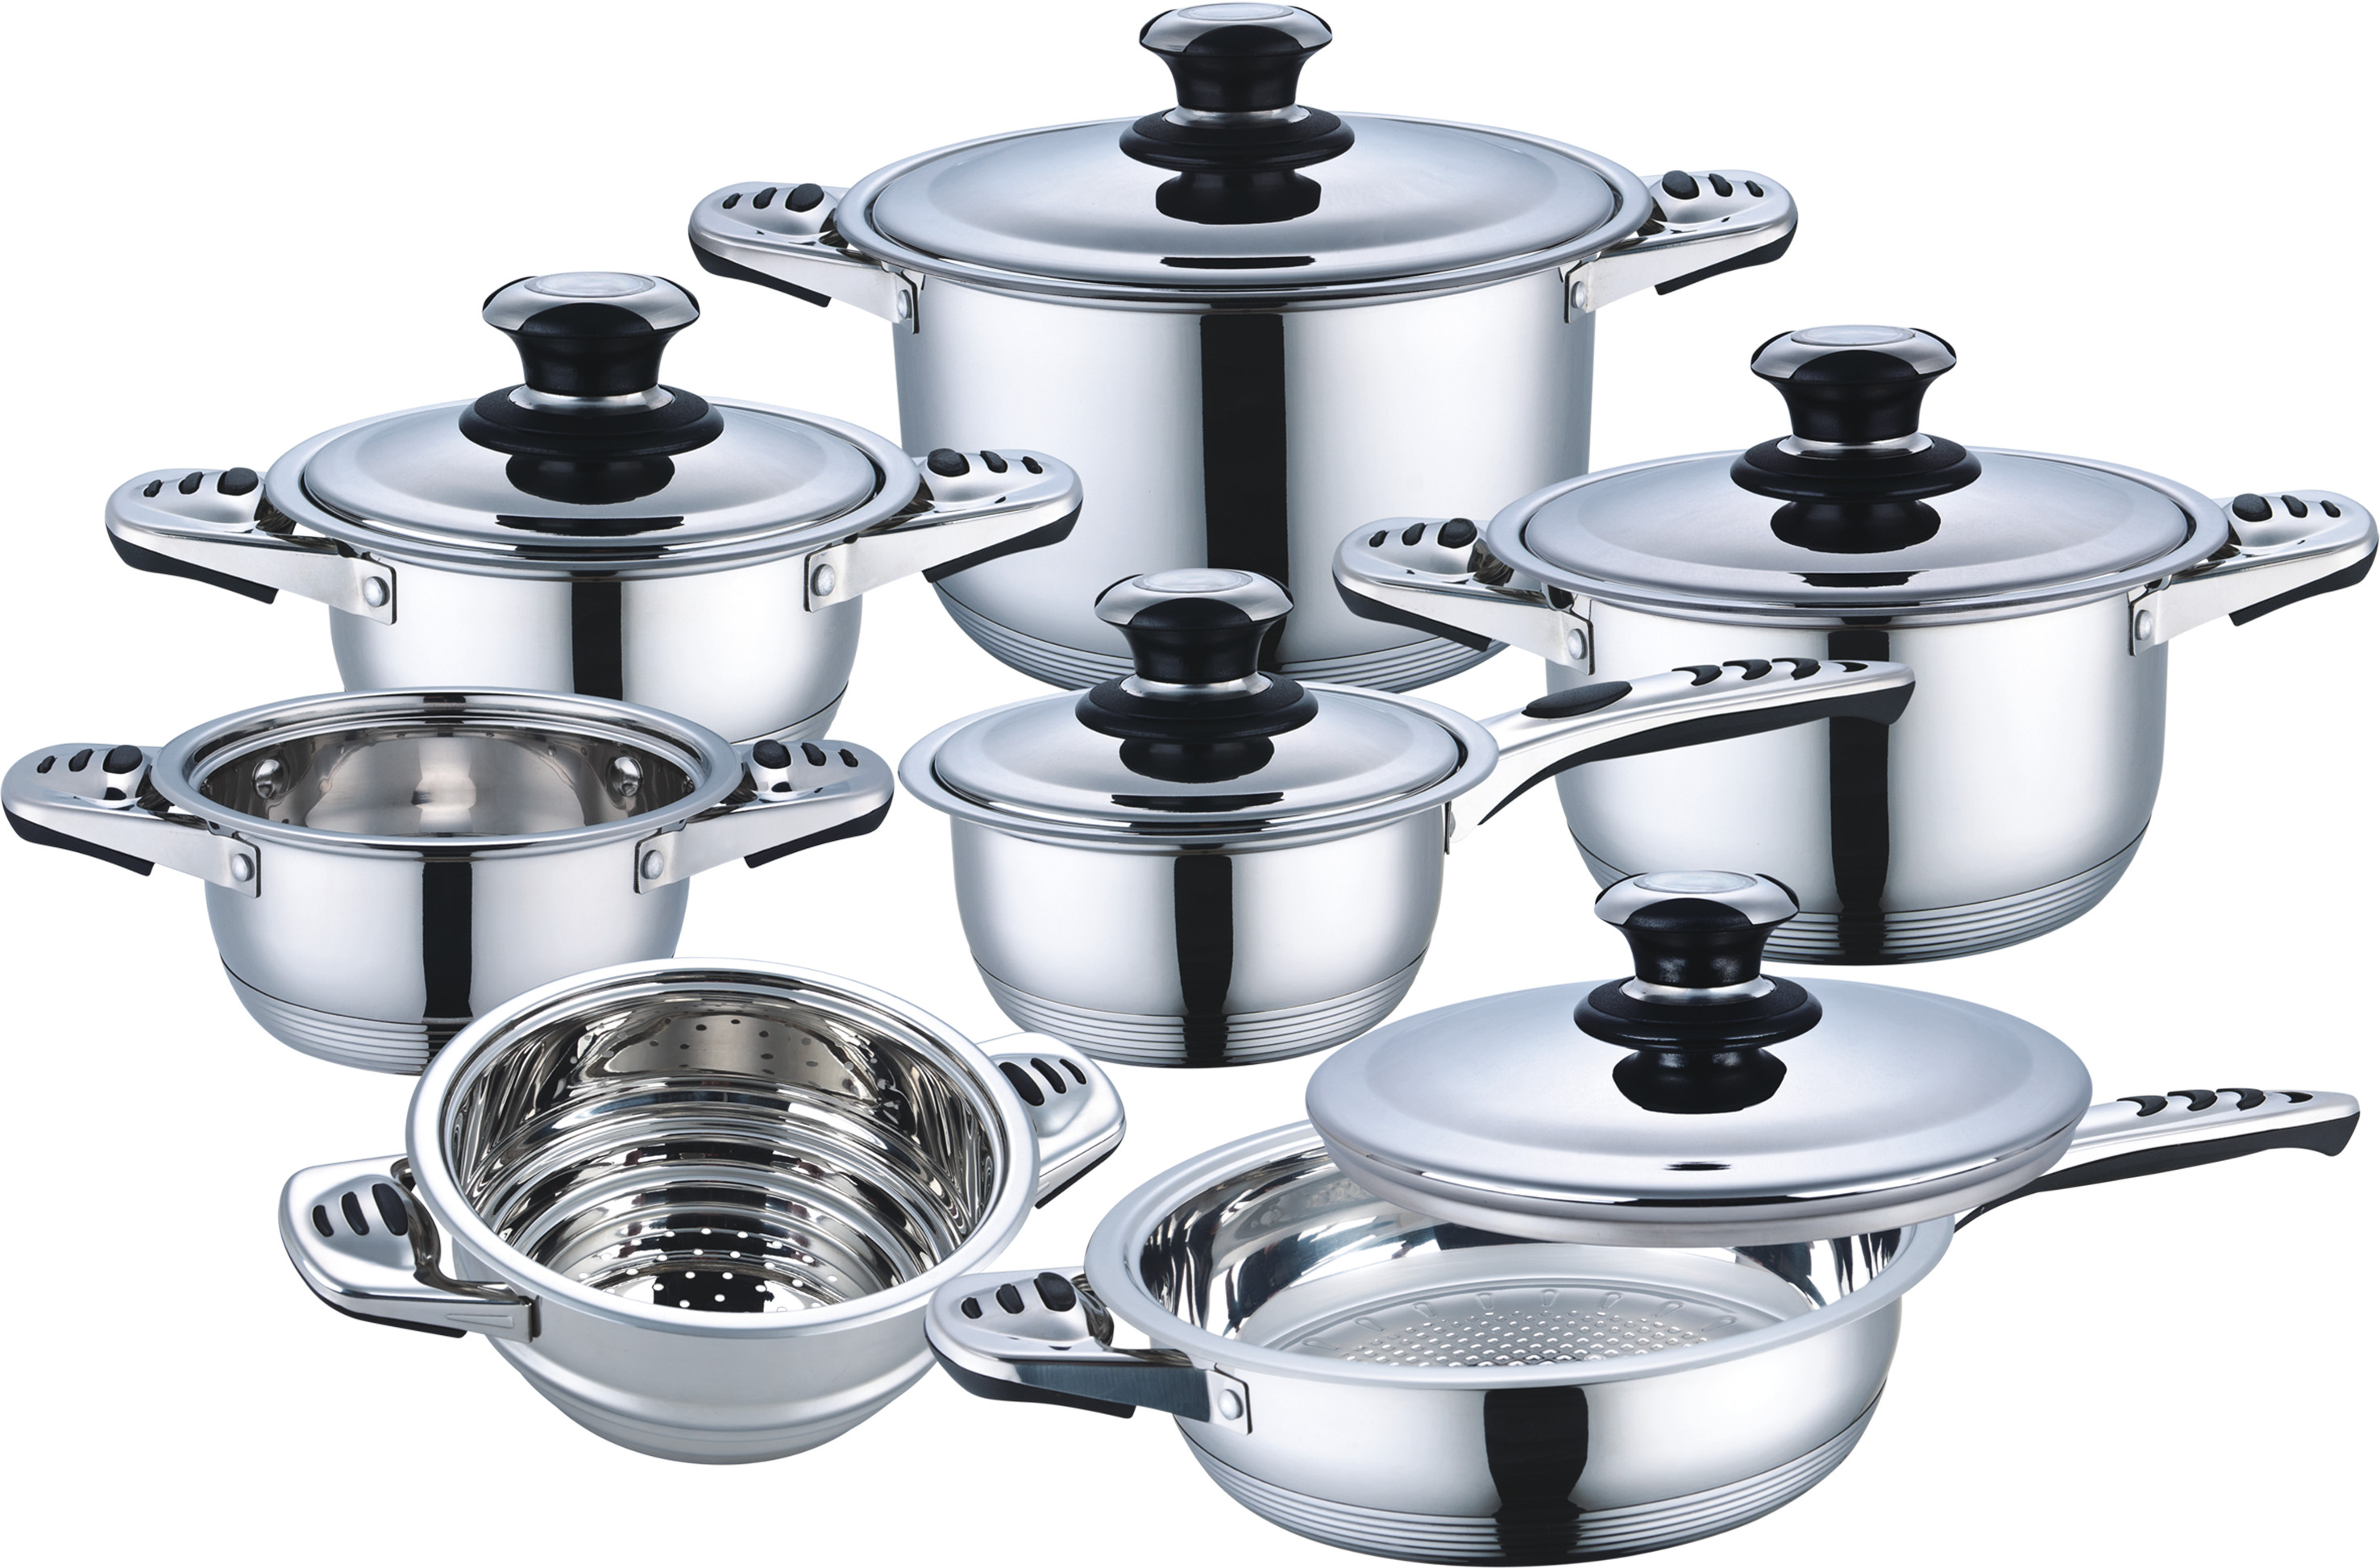 12pcs high quality stainless steel cookware set with induction bottom 